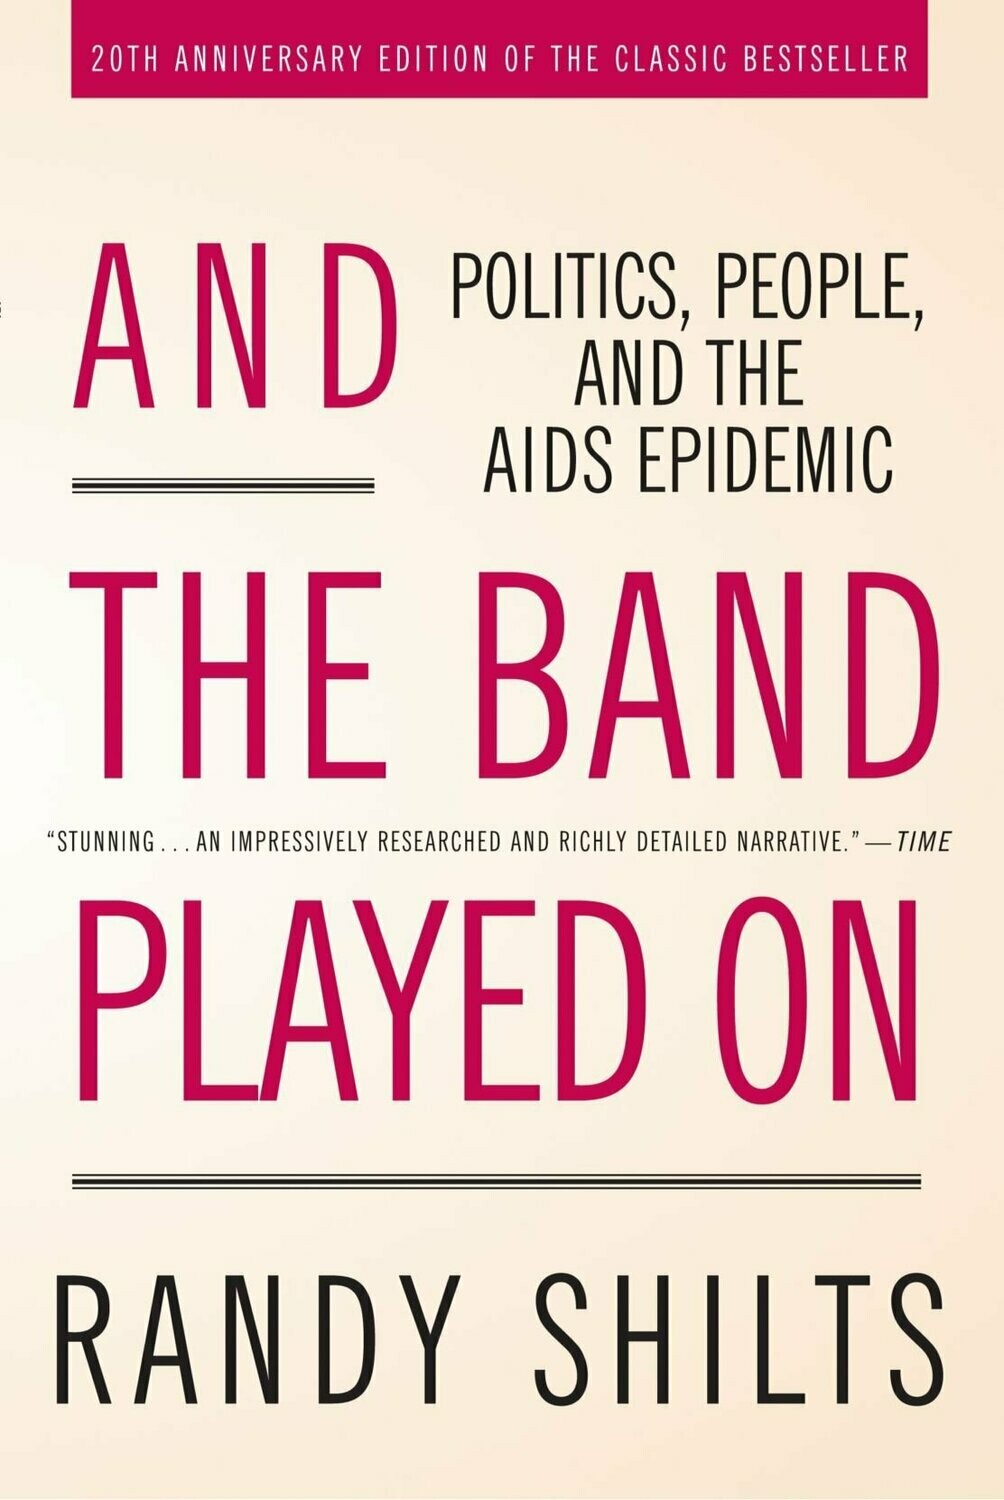 And the Band Played On: Politics, People, and the Epidemic by Randy Shilts